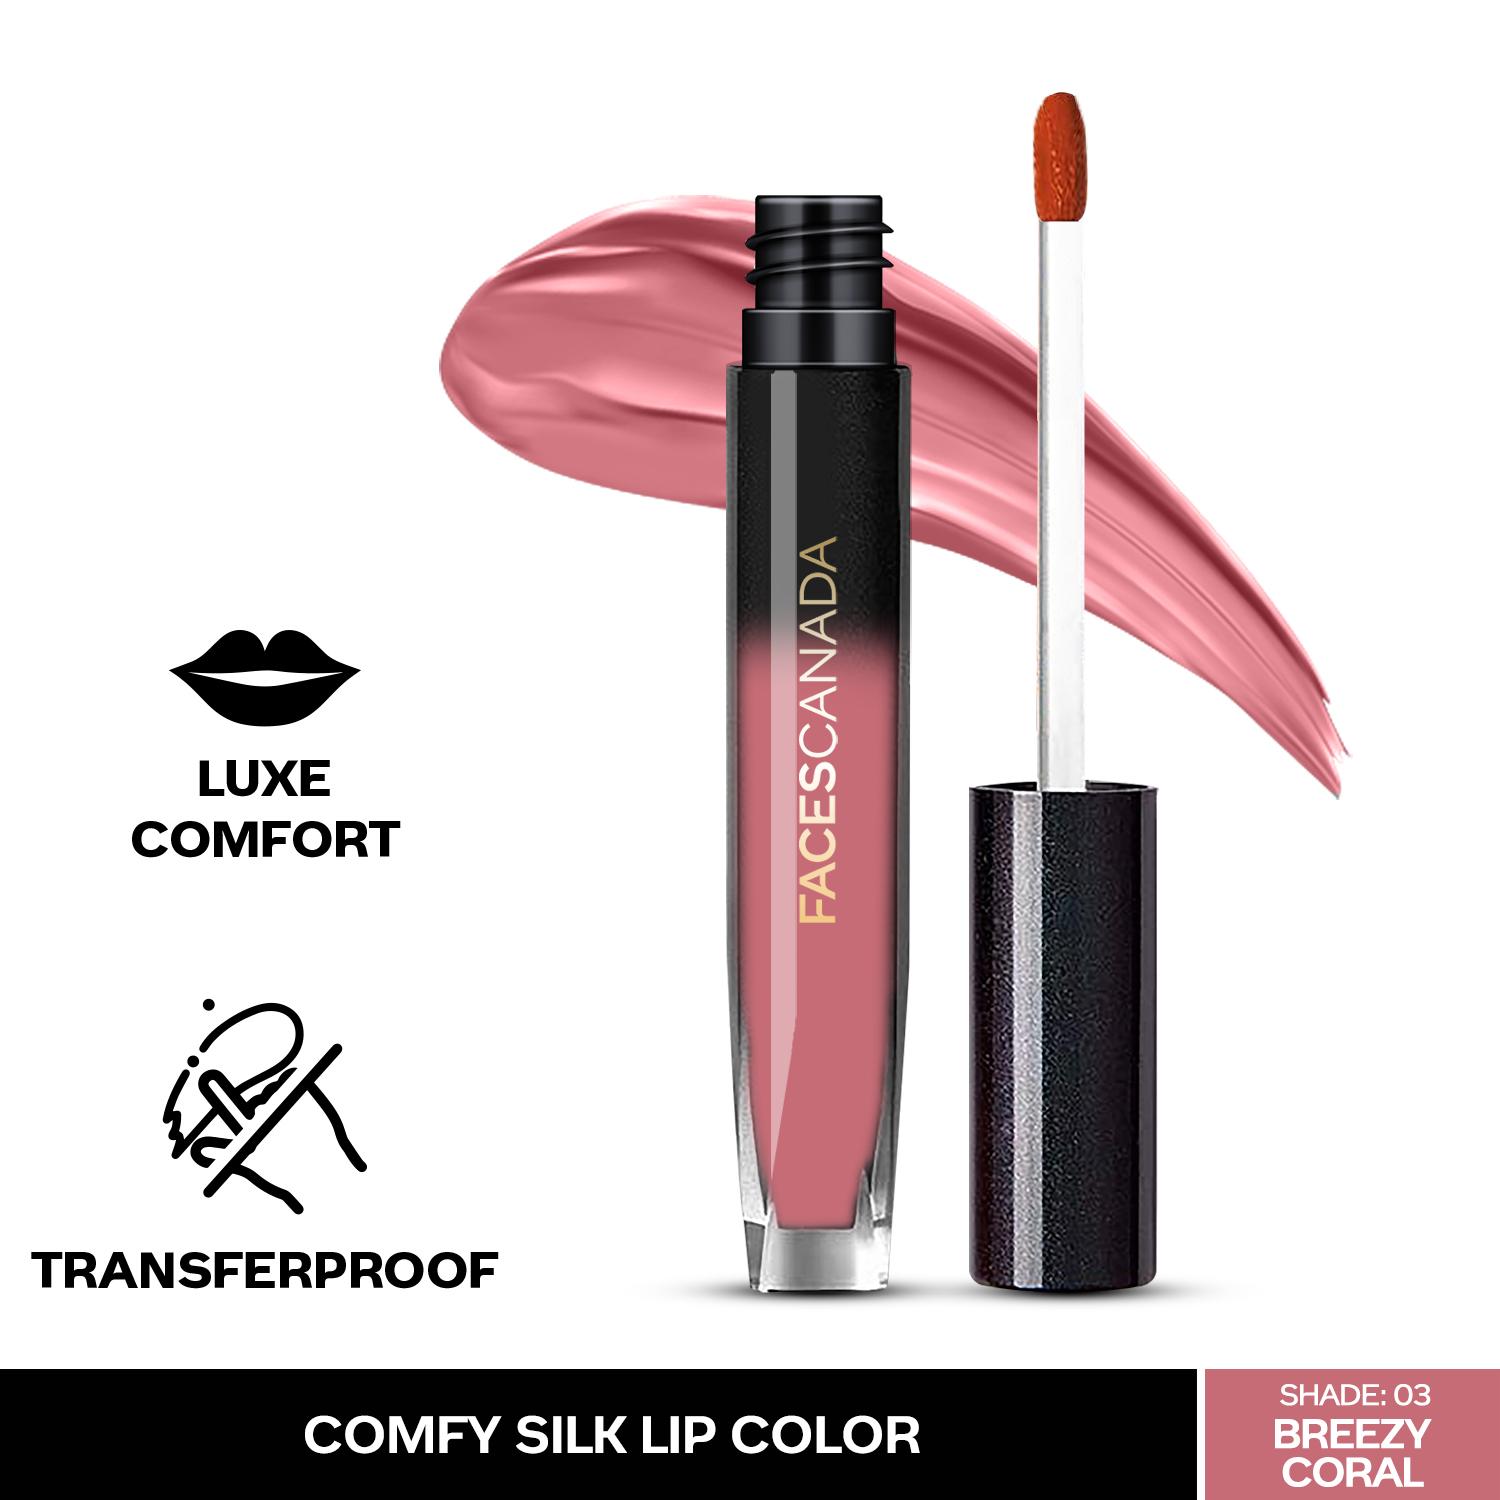 Faces Canada | Faces Canada Comfy Silk Lip Color I Mulberry Oil, Luxe Comfort, No Dryness I Breezy Coral 03 (3 ml)